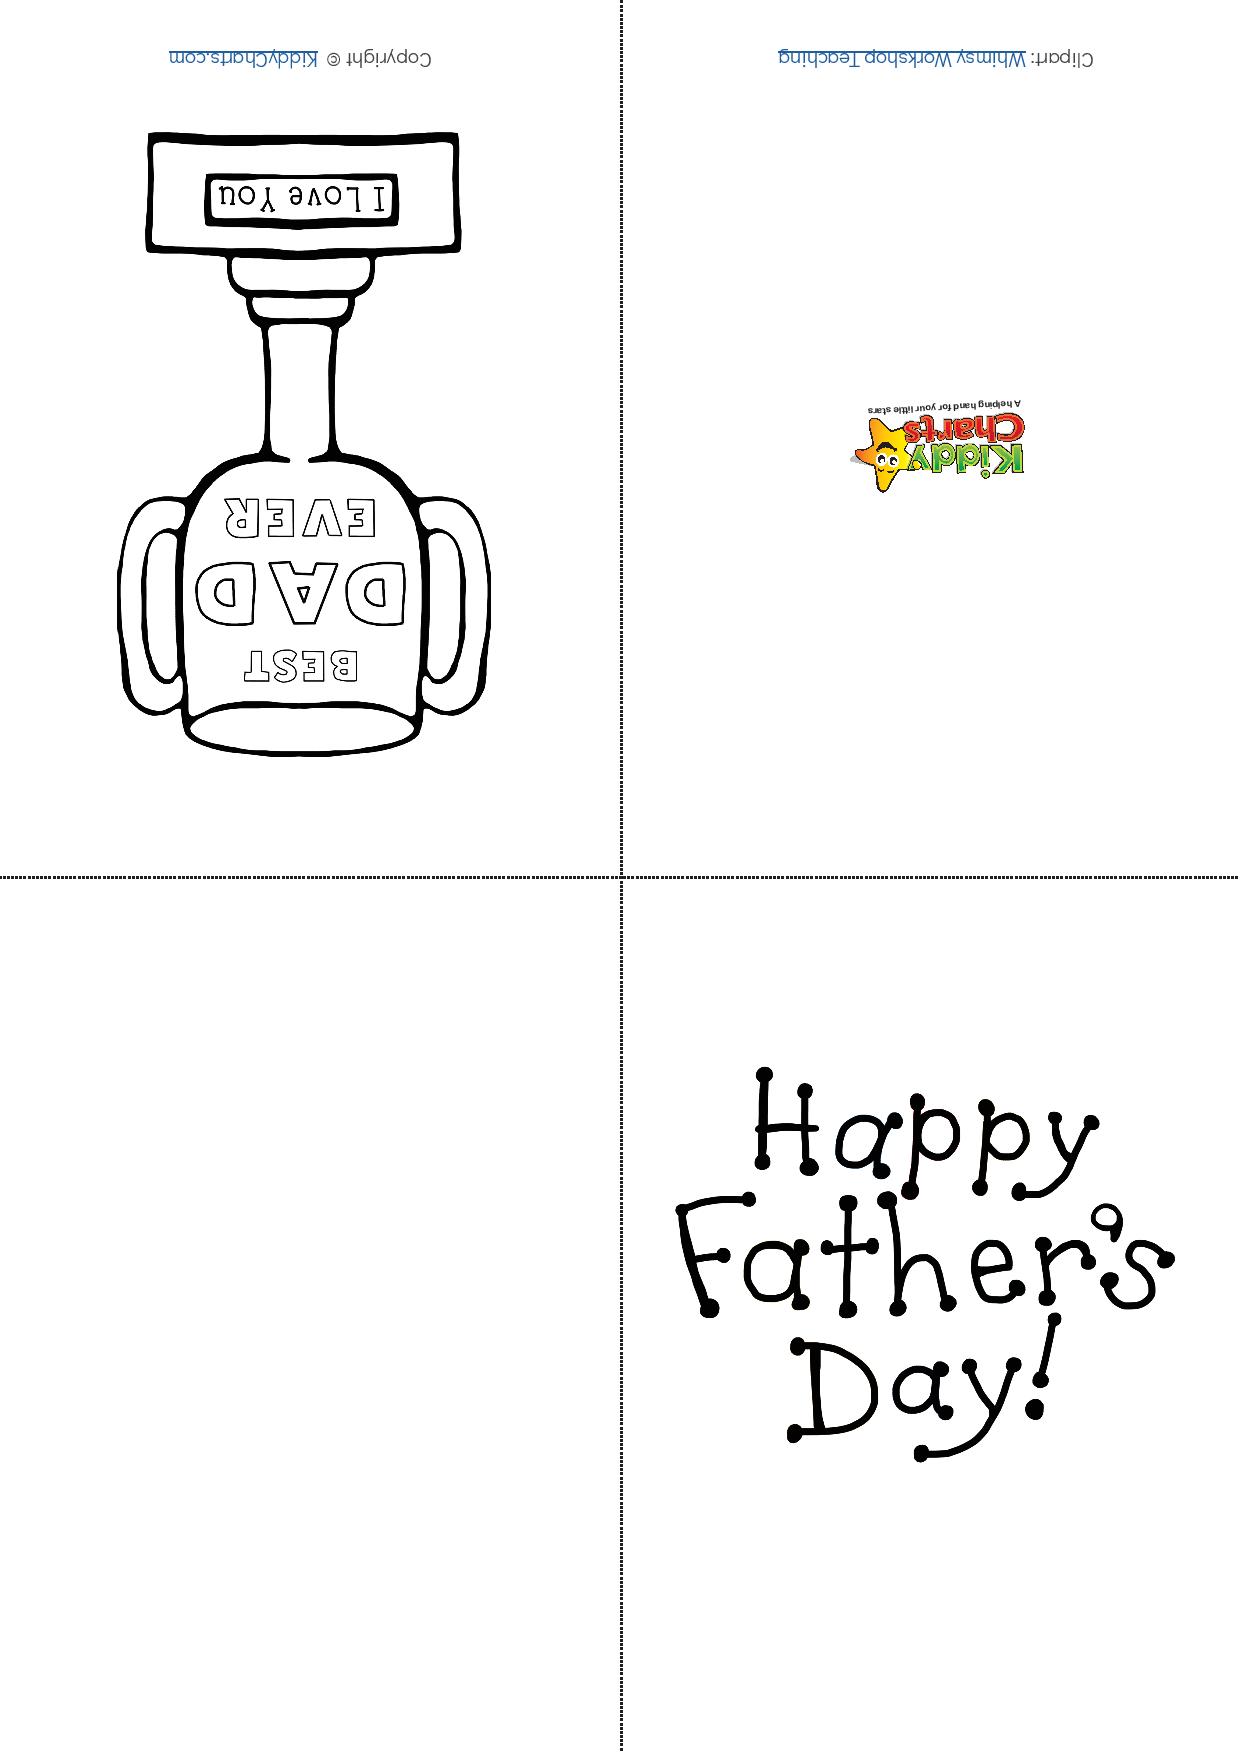 A father is being celebrated with a "Best Dad Ever" chart and a clipart of love to show appreciation.